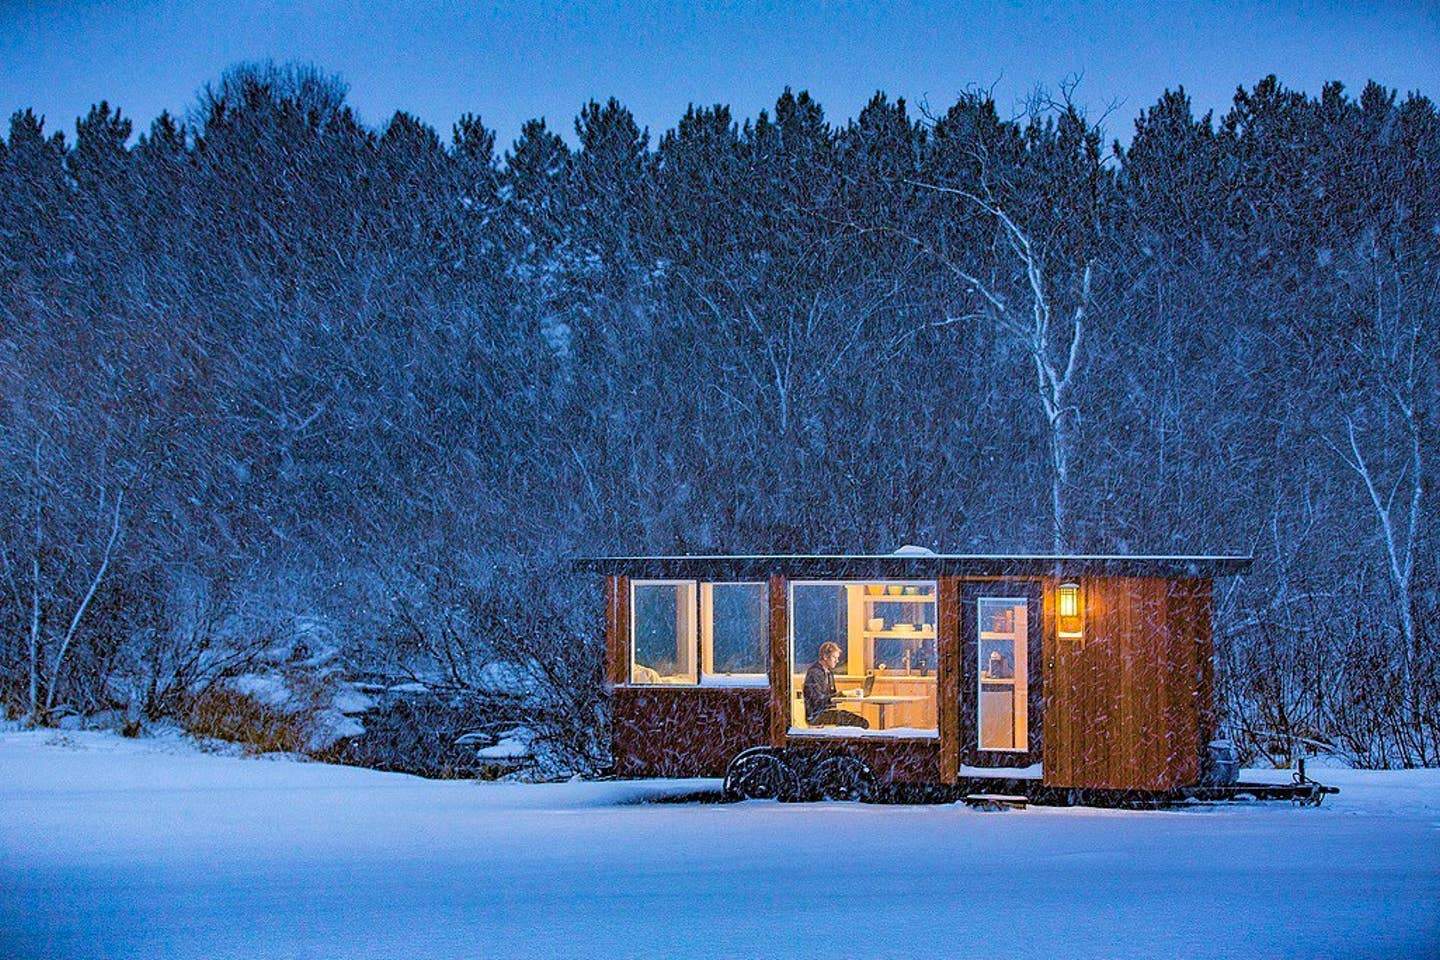 50 Tiny Houses You Can Rent on Airbnb in 2021!